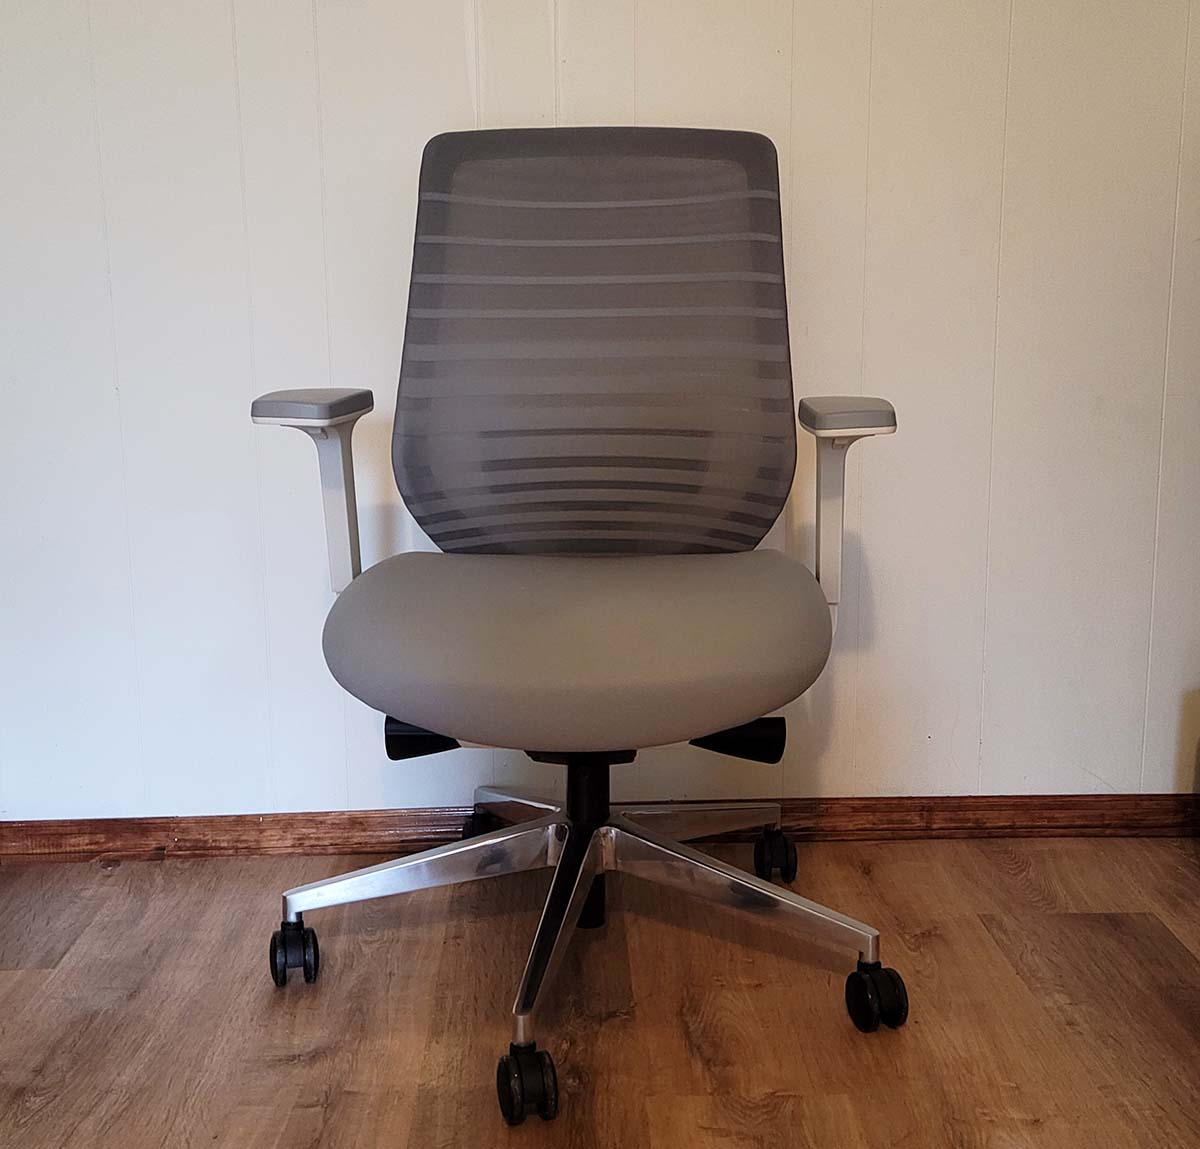 The front of the Branch ergonomic chair